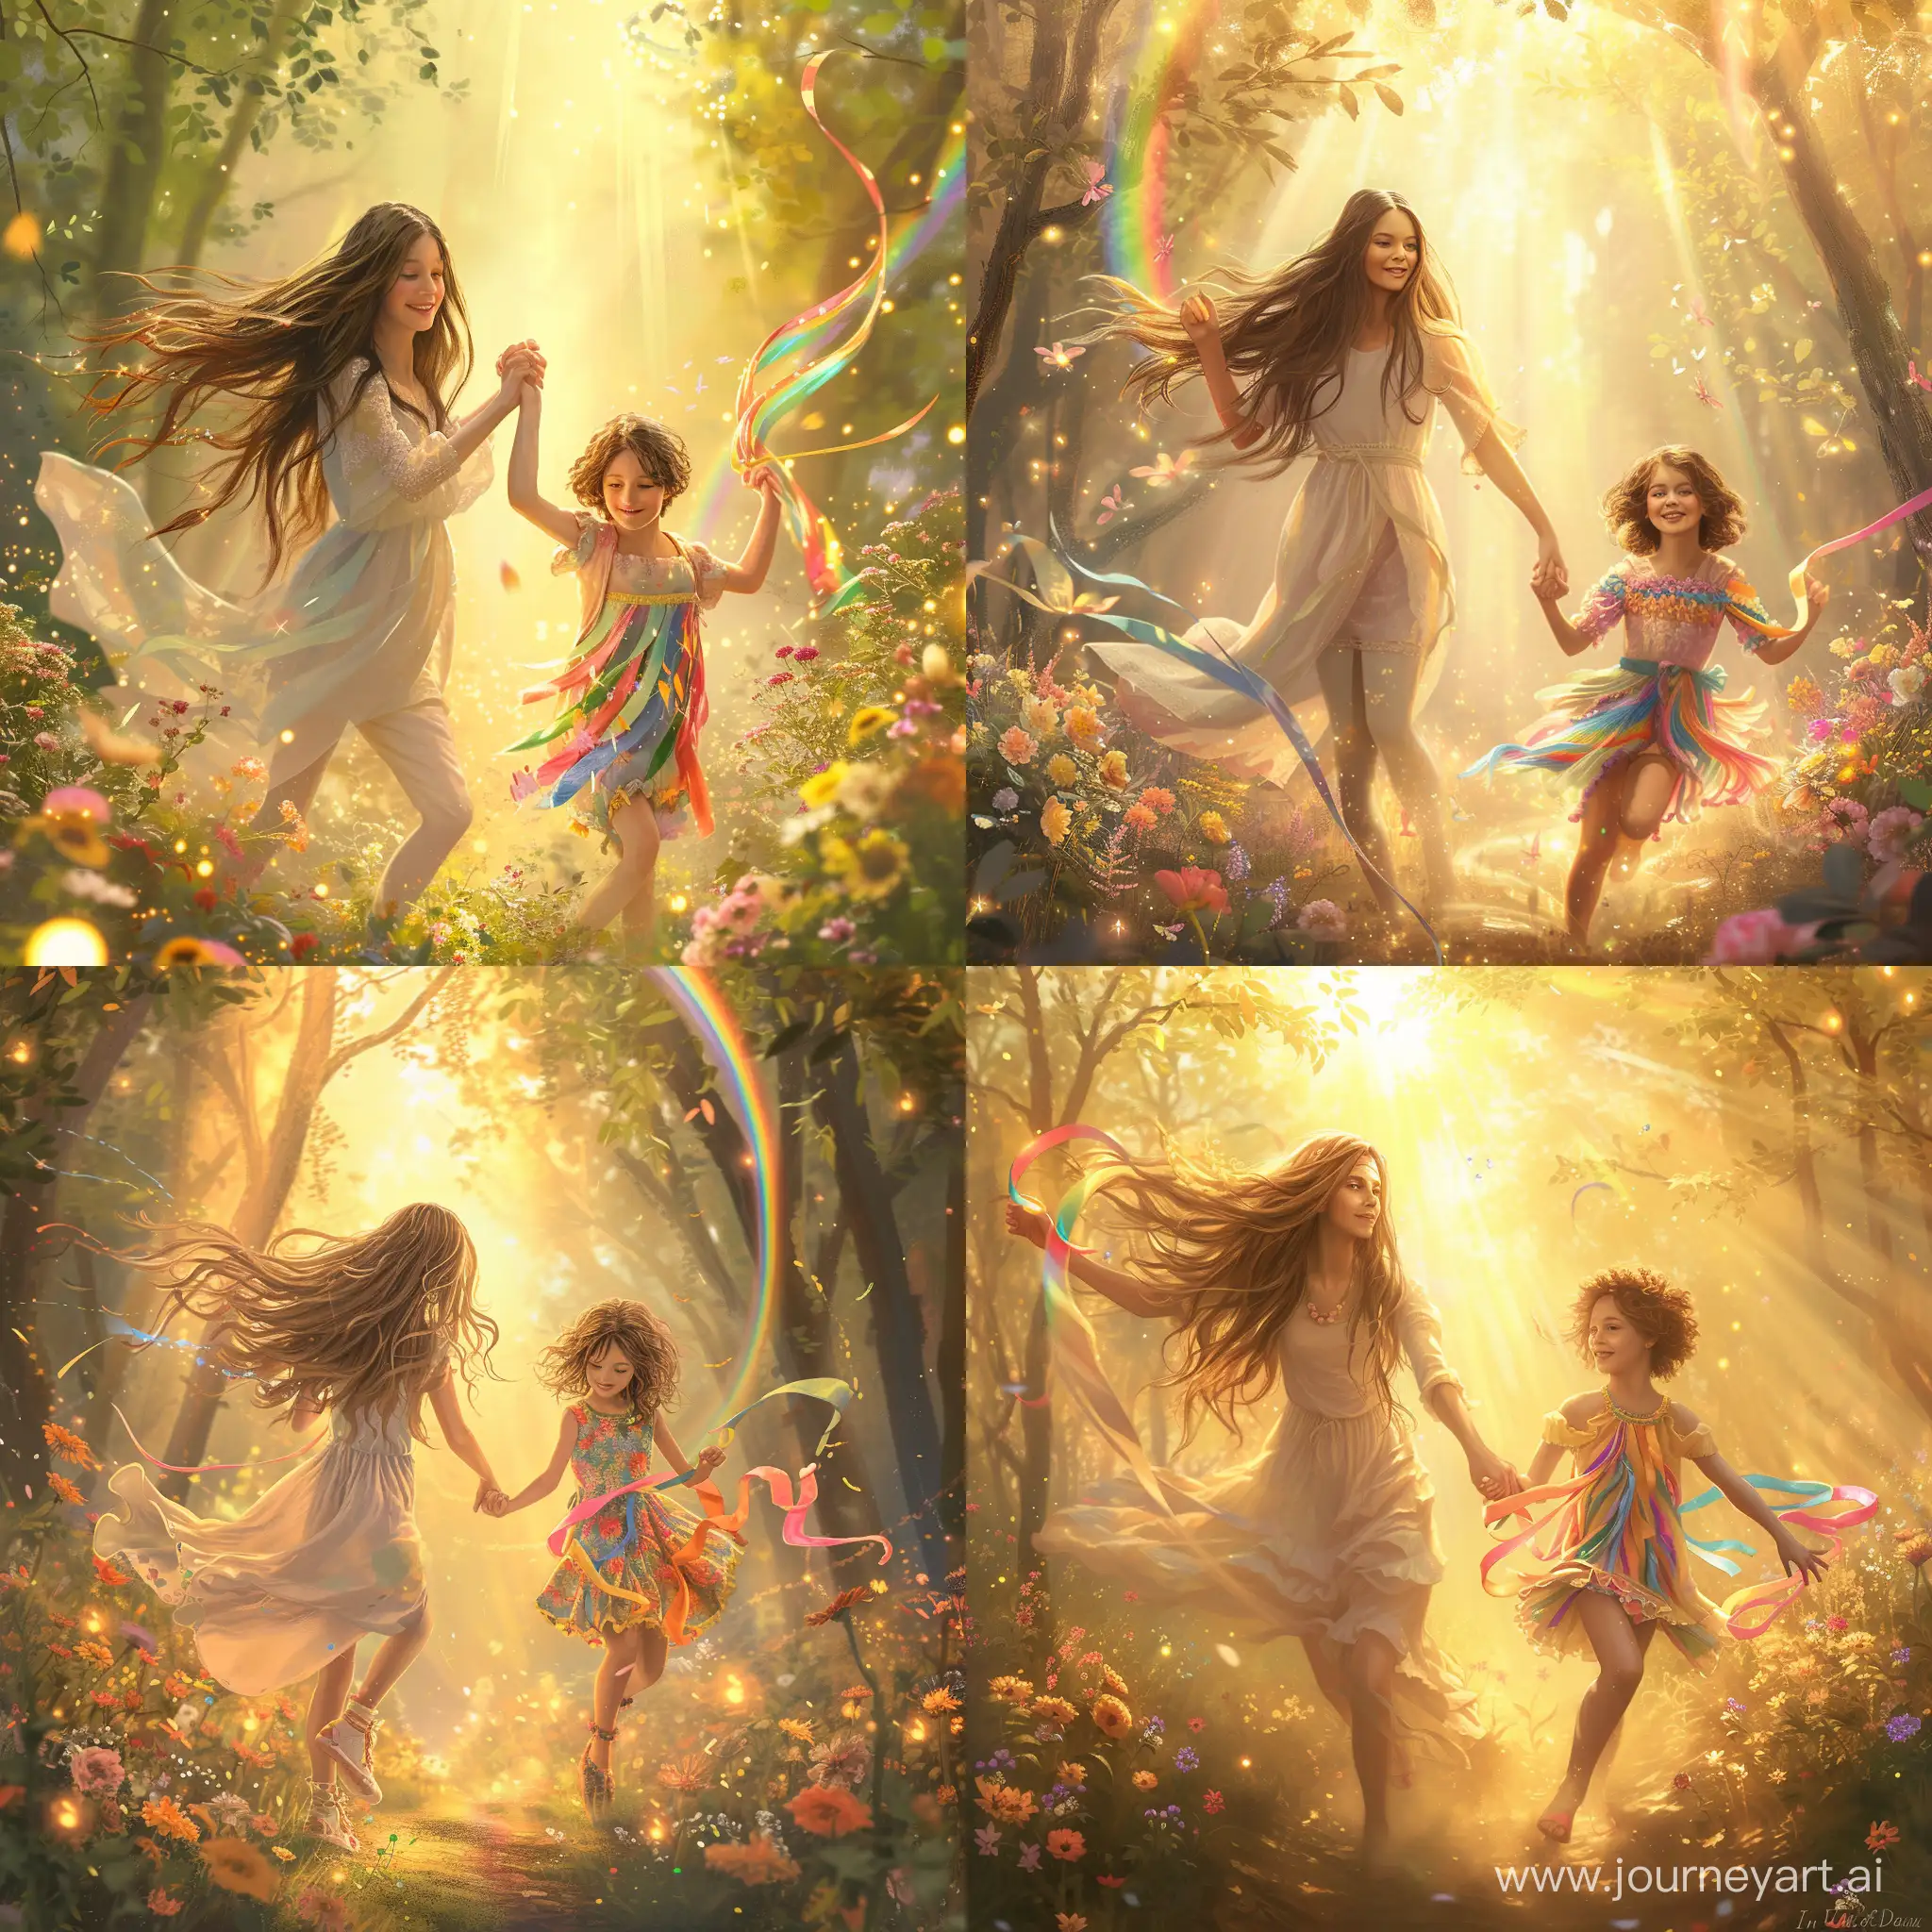 Sisters-Enchanting-Journey-Running-Through-a-Sunlit-Forest-of-Joy